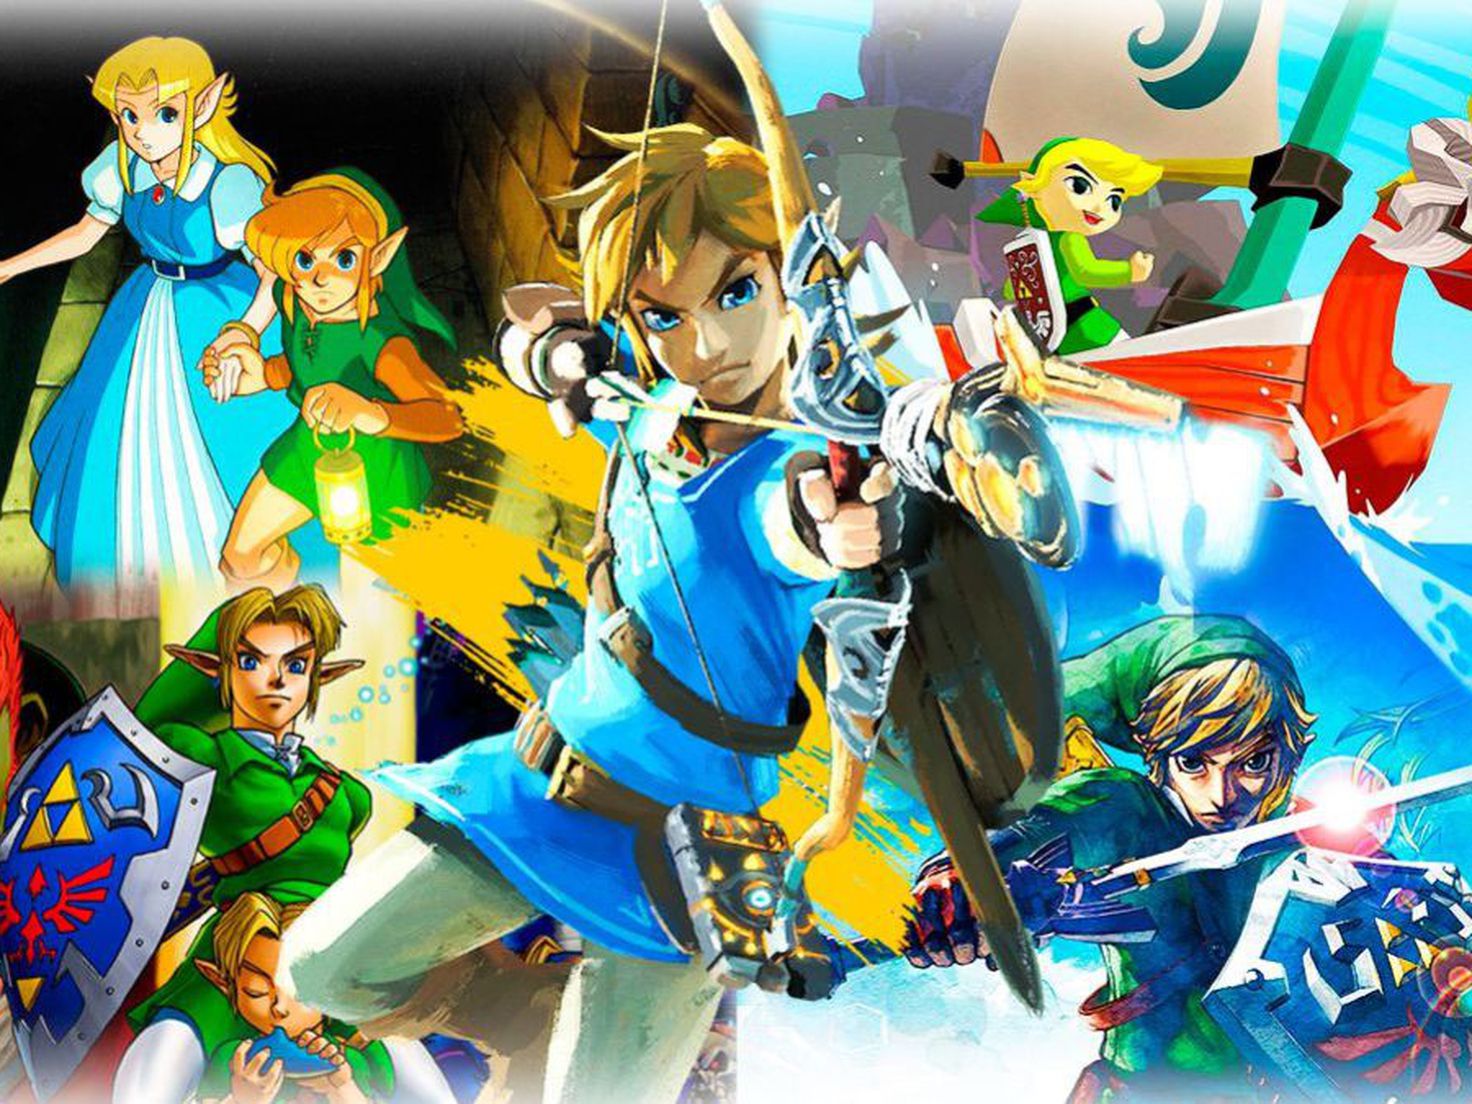 How to Play The Legend of Zelda Games in Chronological Order - IGN